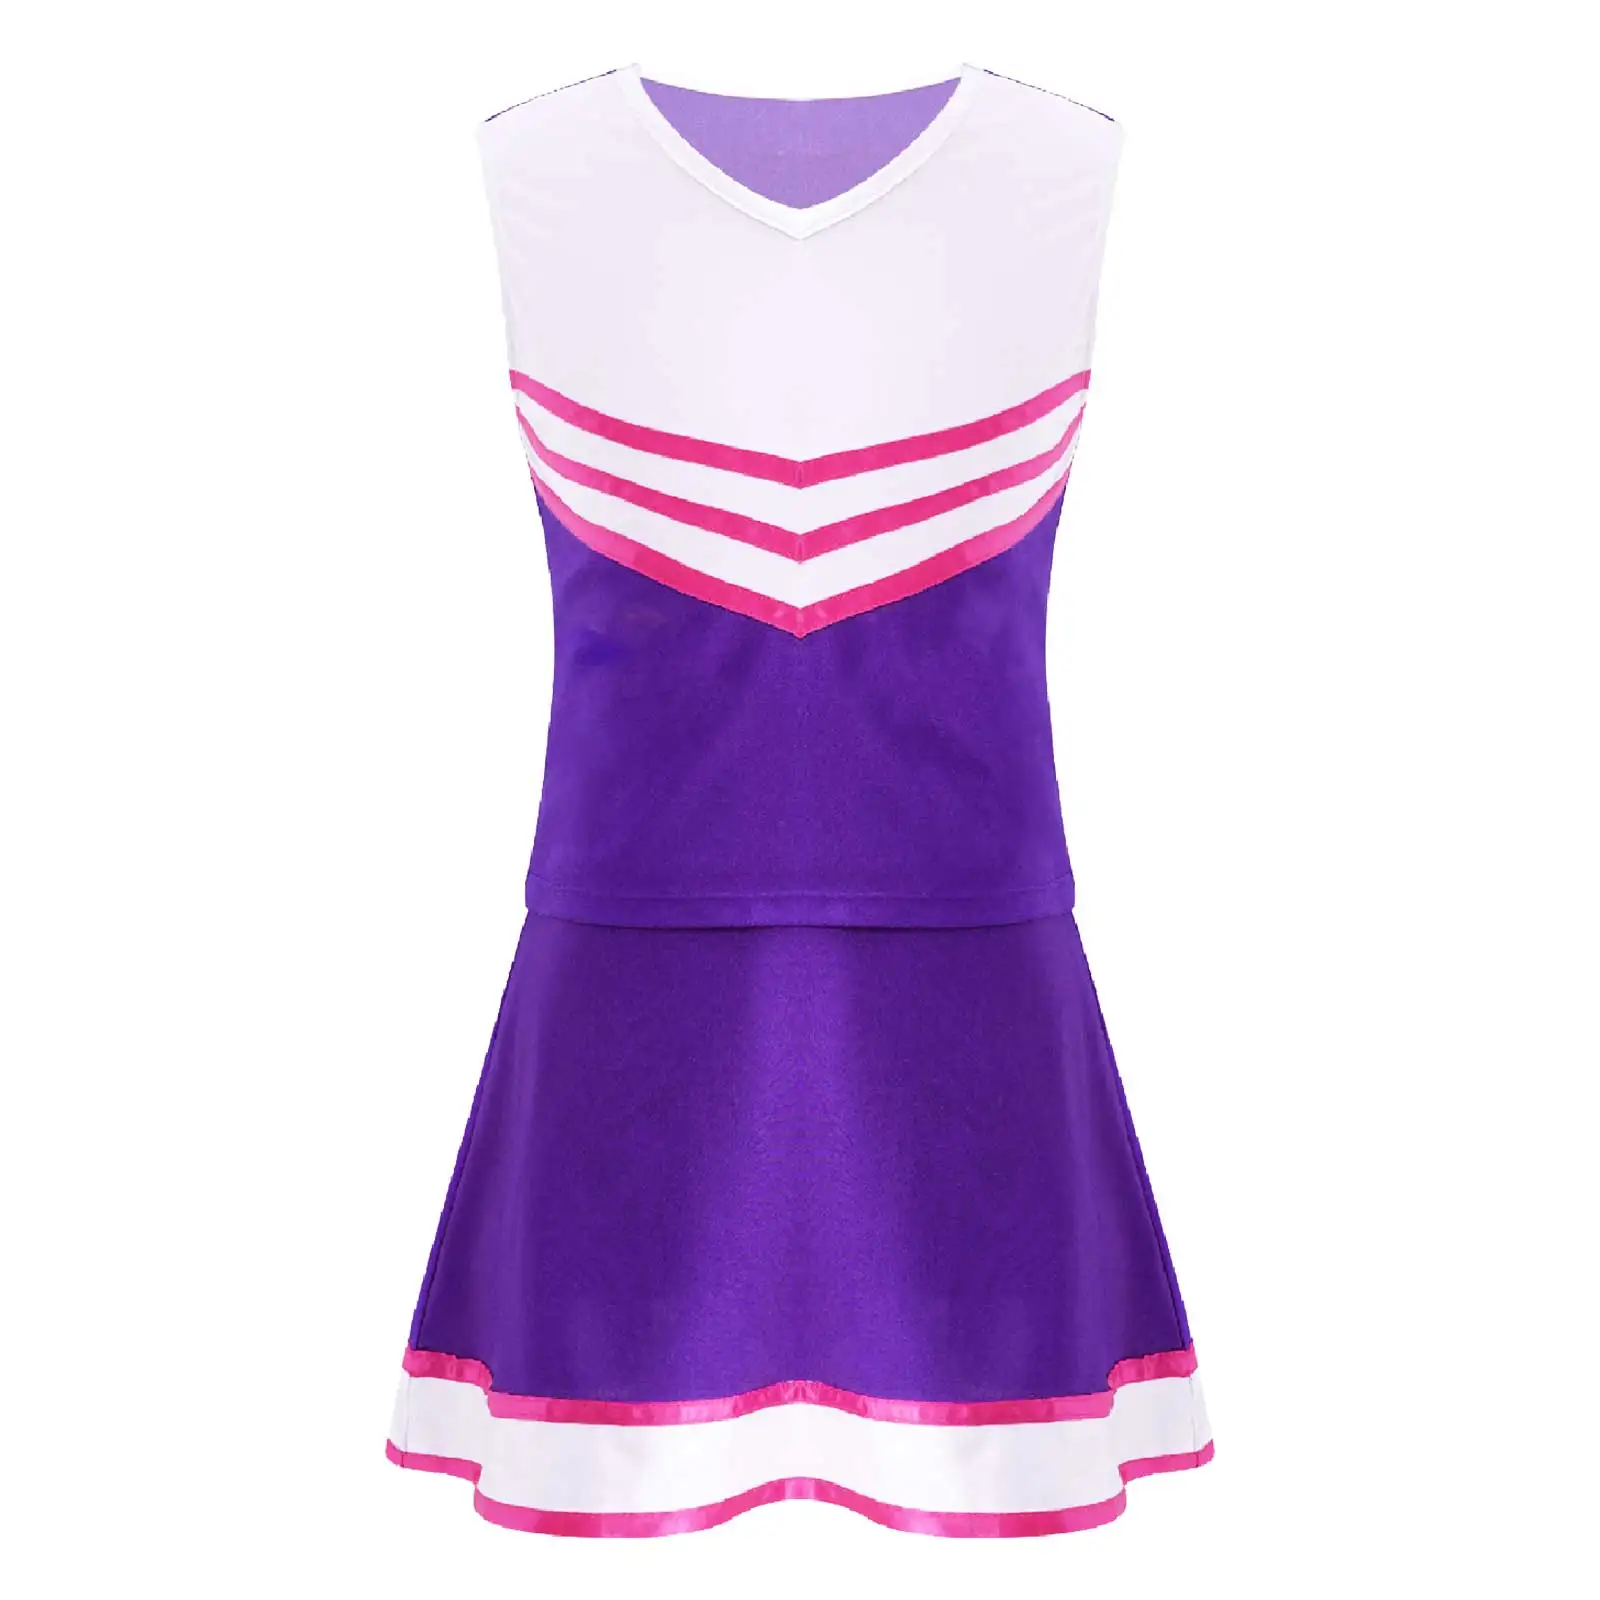 children's clothing sets expensive Kids Girls Cheer Leader Cheerleading Costumes Outfit Uniform Cheer Up Encourage Dance Dress Children Stage Performance Clothes pajamas for baby girl